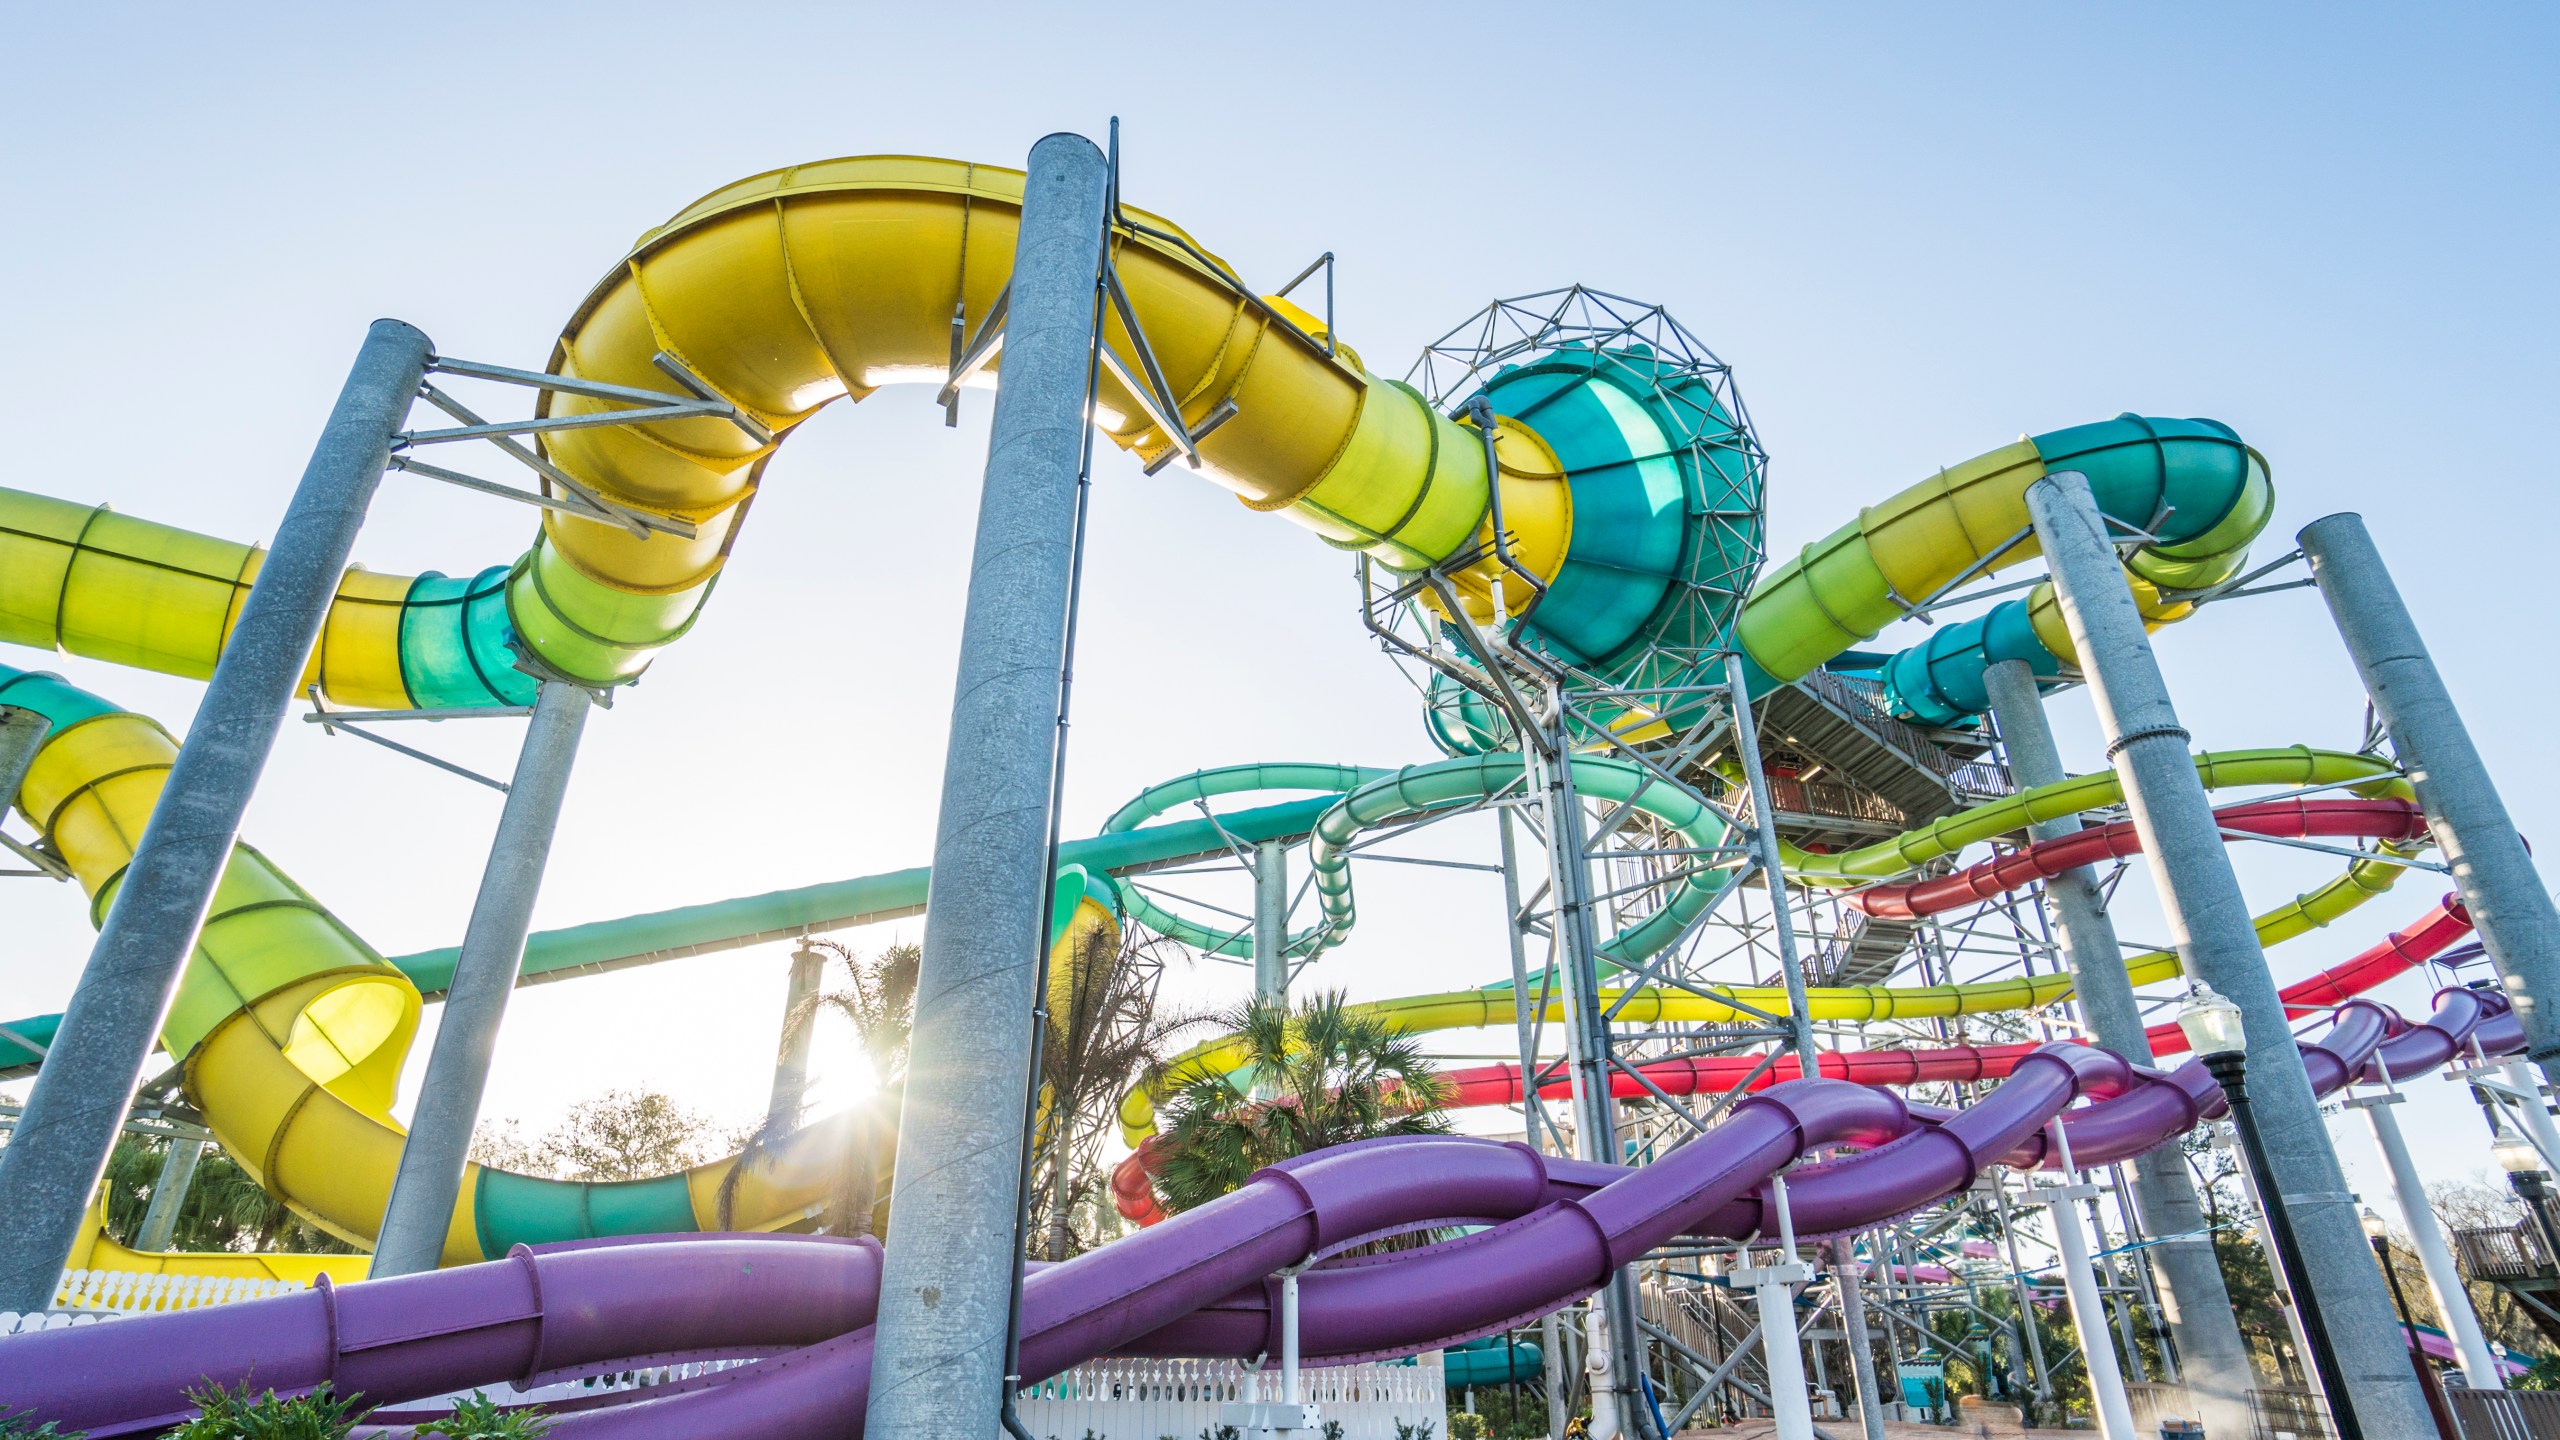 This Tampa outdoor water park was voted one of the best in the United States